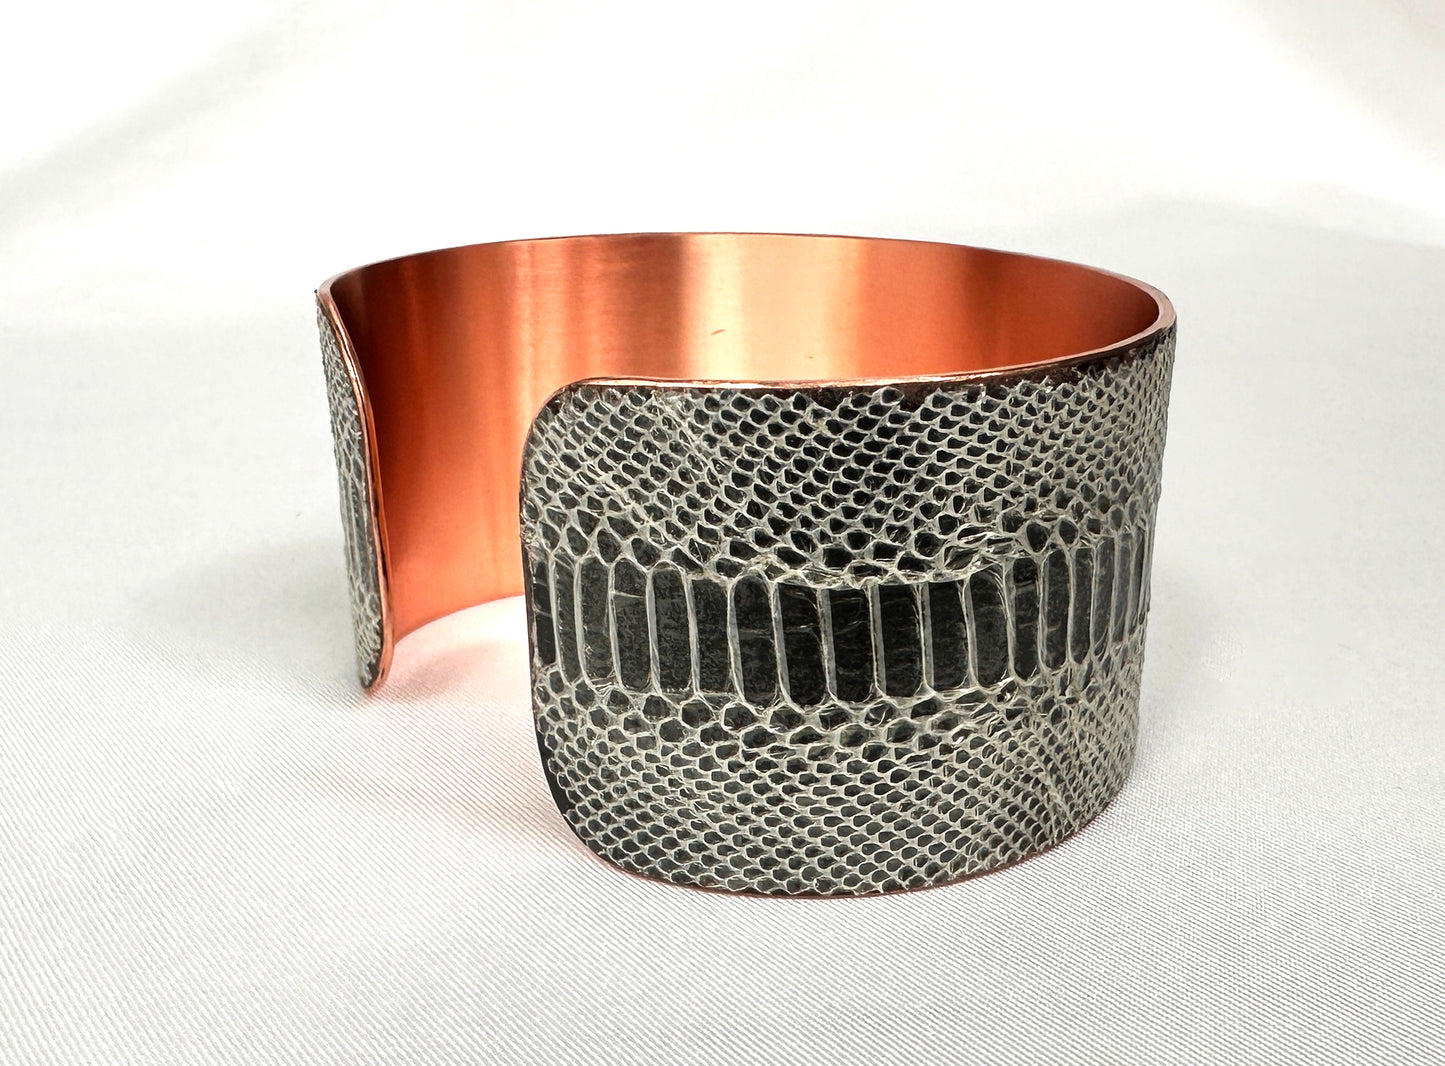 1.5" Antiqued Copper Snake Shed Cuff Bracelet (Colombian Rainbow Boa)